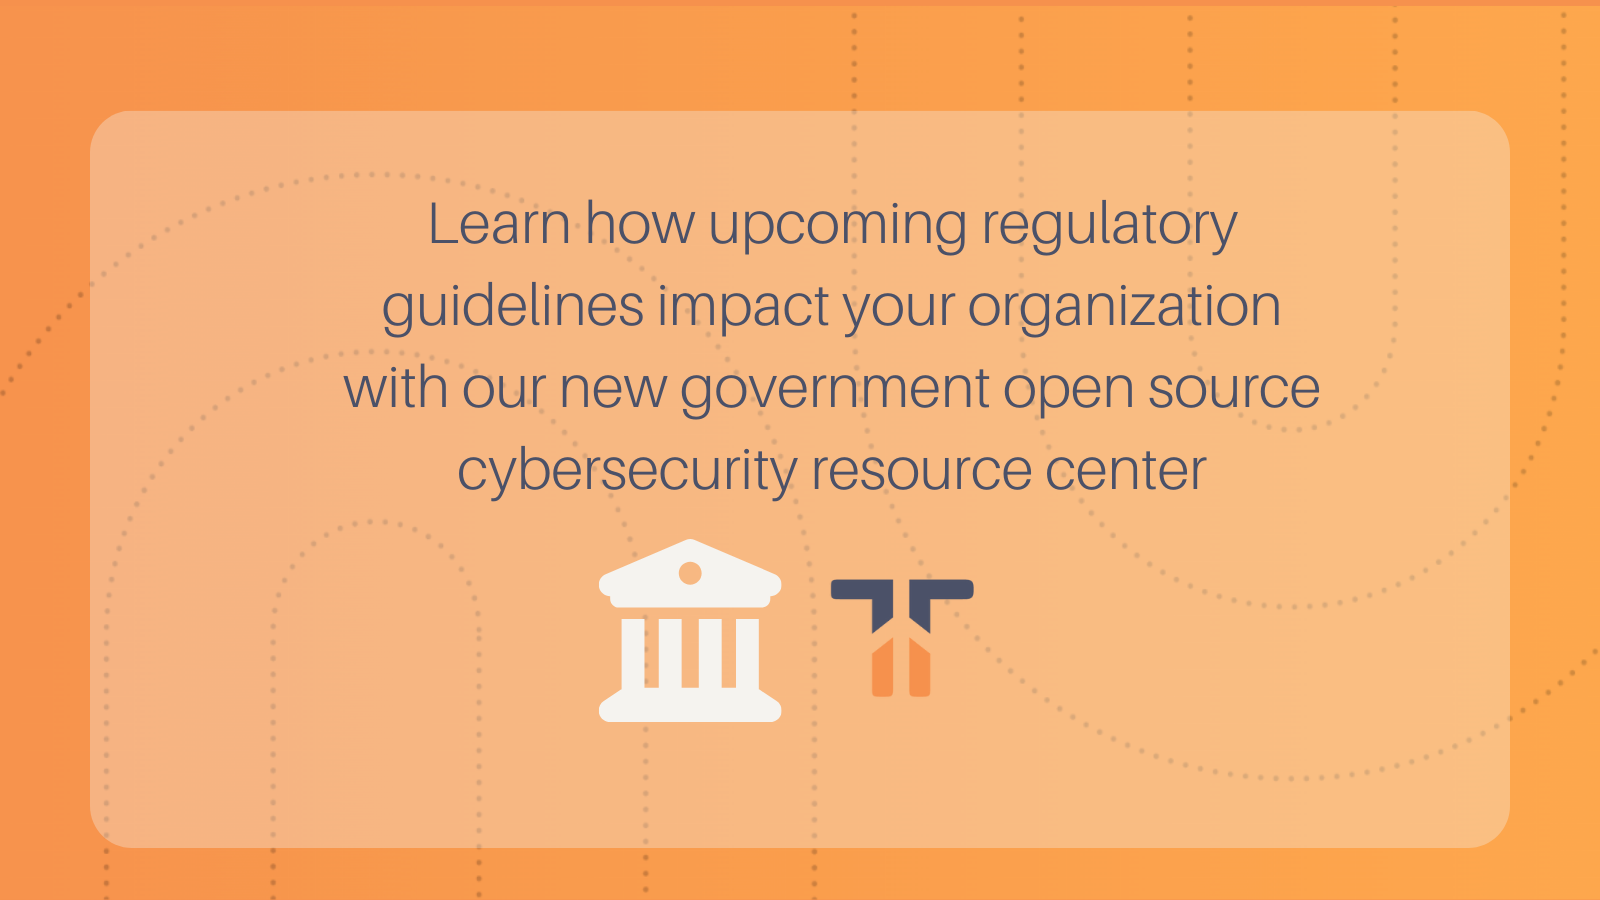 Learn how upcoming regulatory guidelines impact your organization with our new government open source cybersecurity resource center